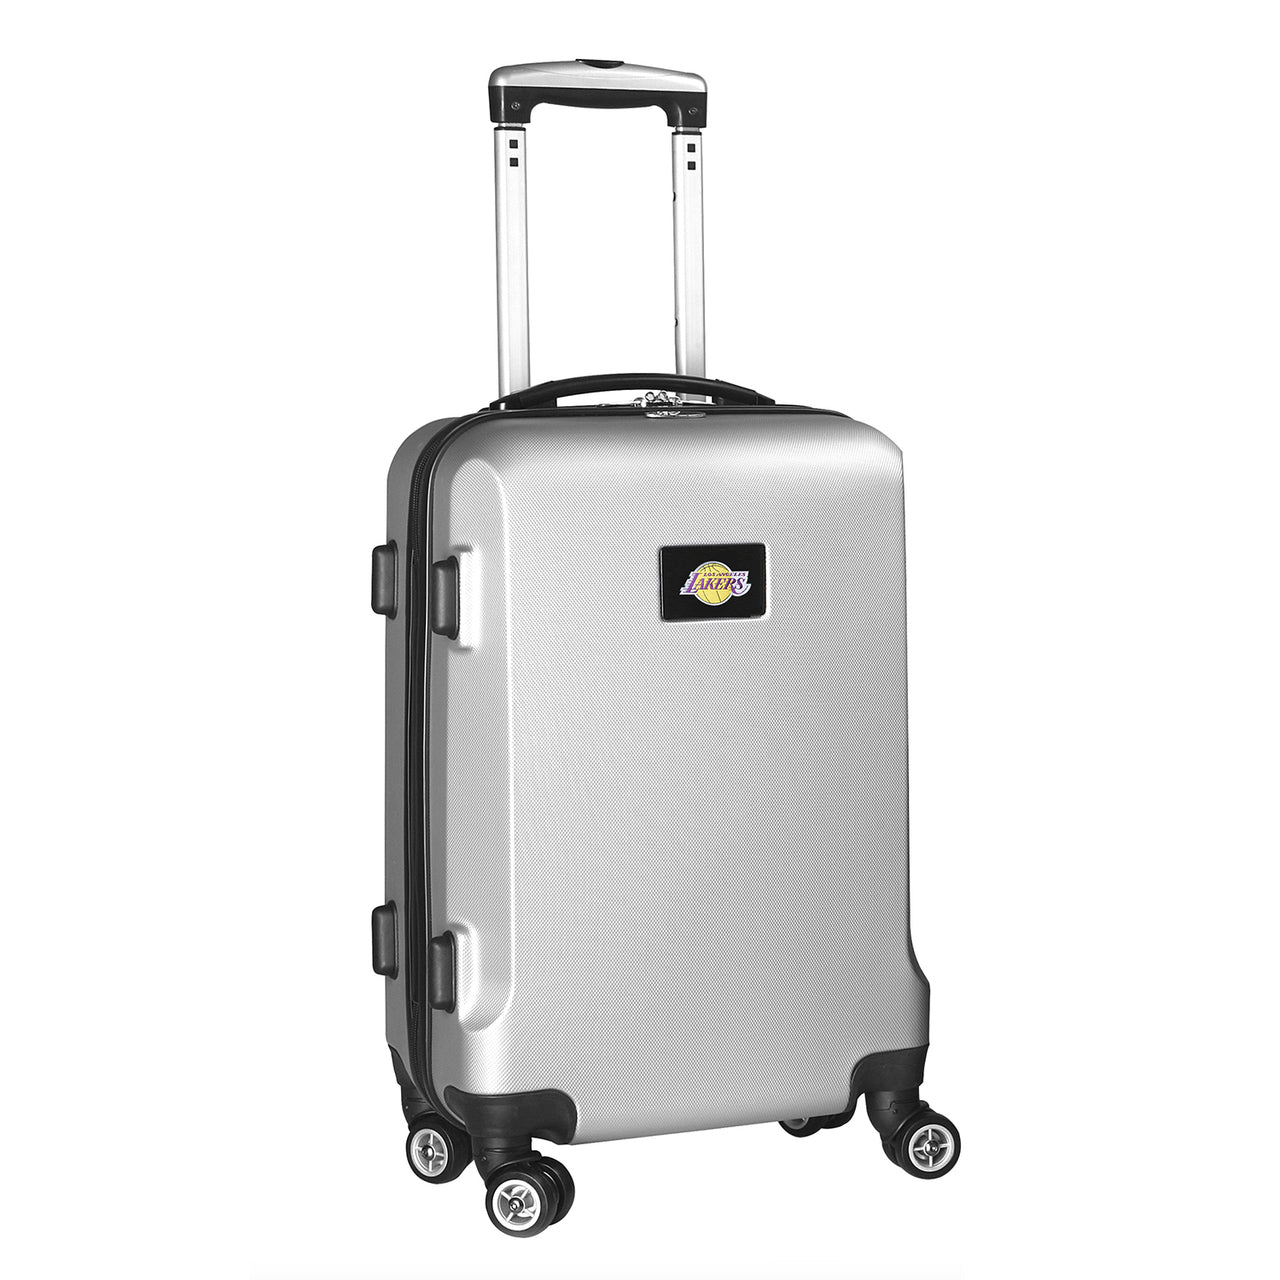 Los Angeles Lakers 20" Silver Domestic Carry-on Spinner